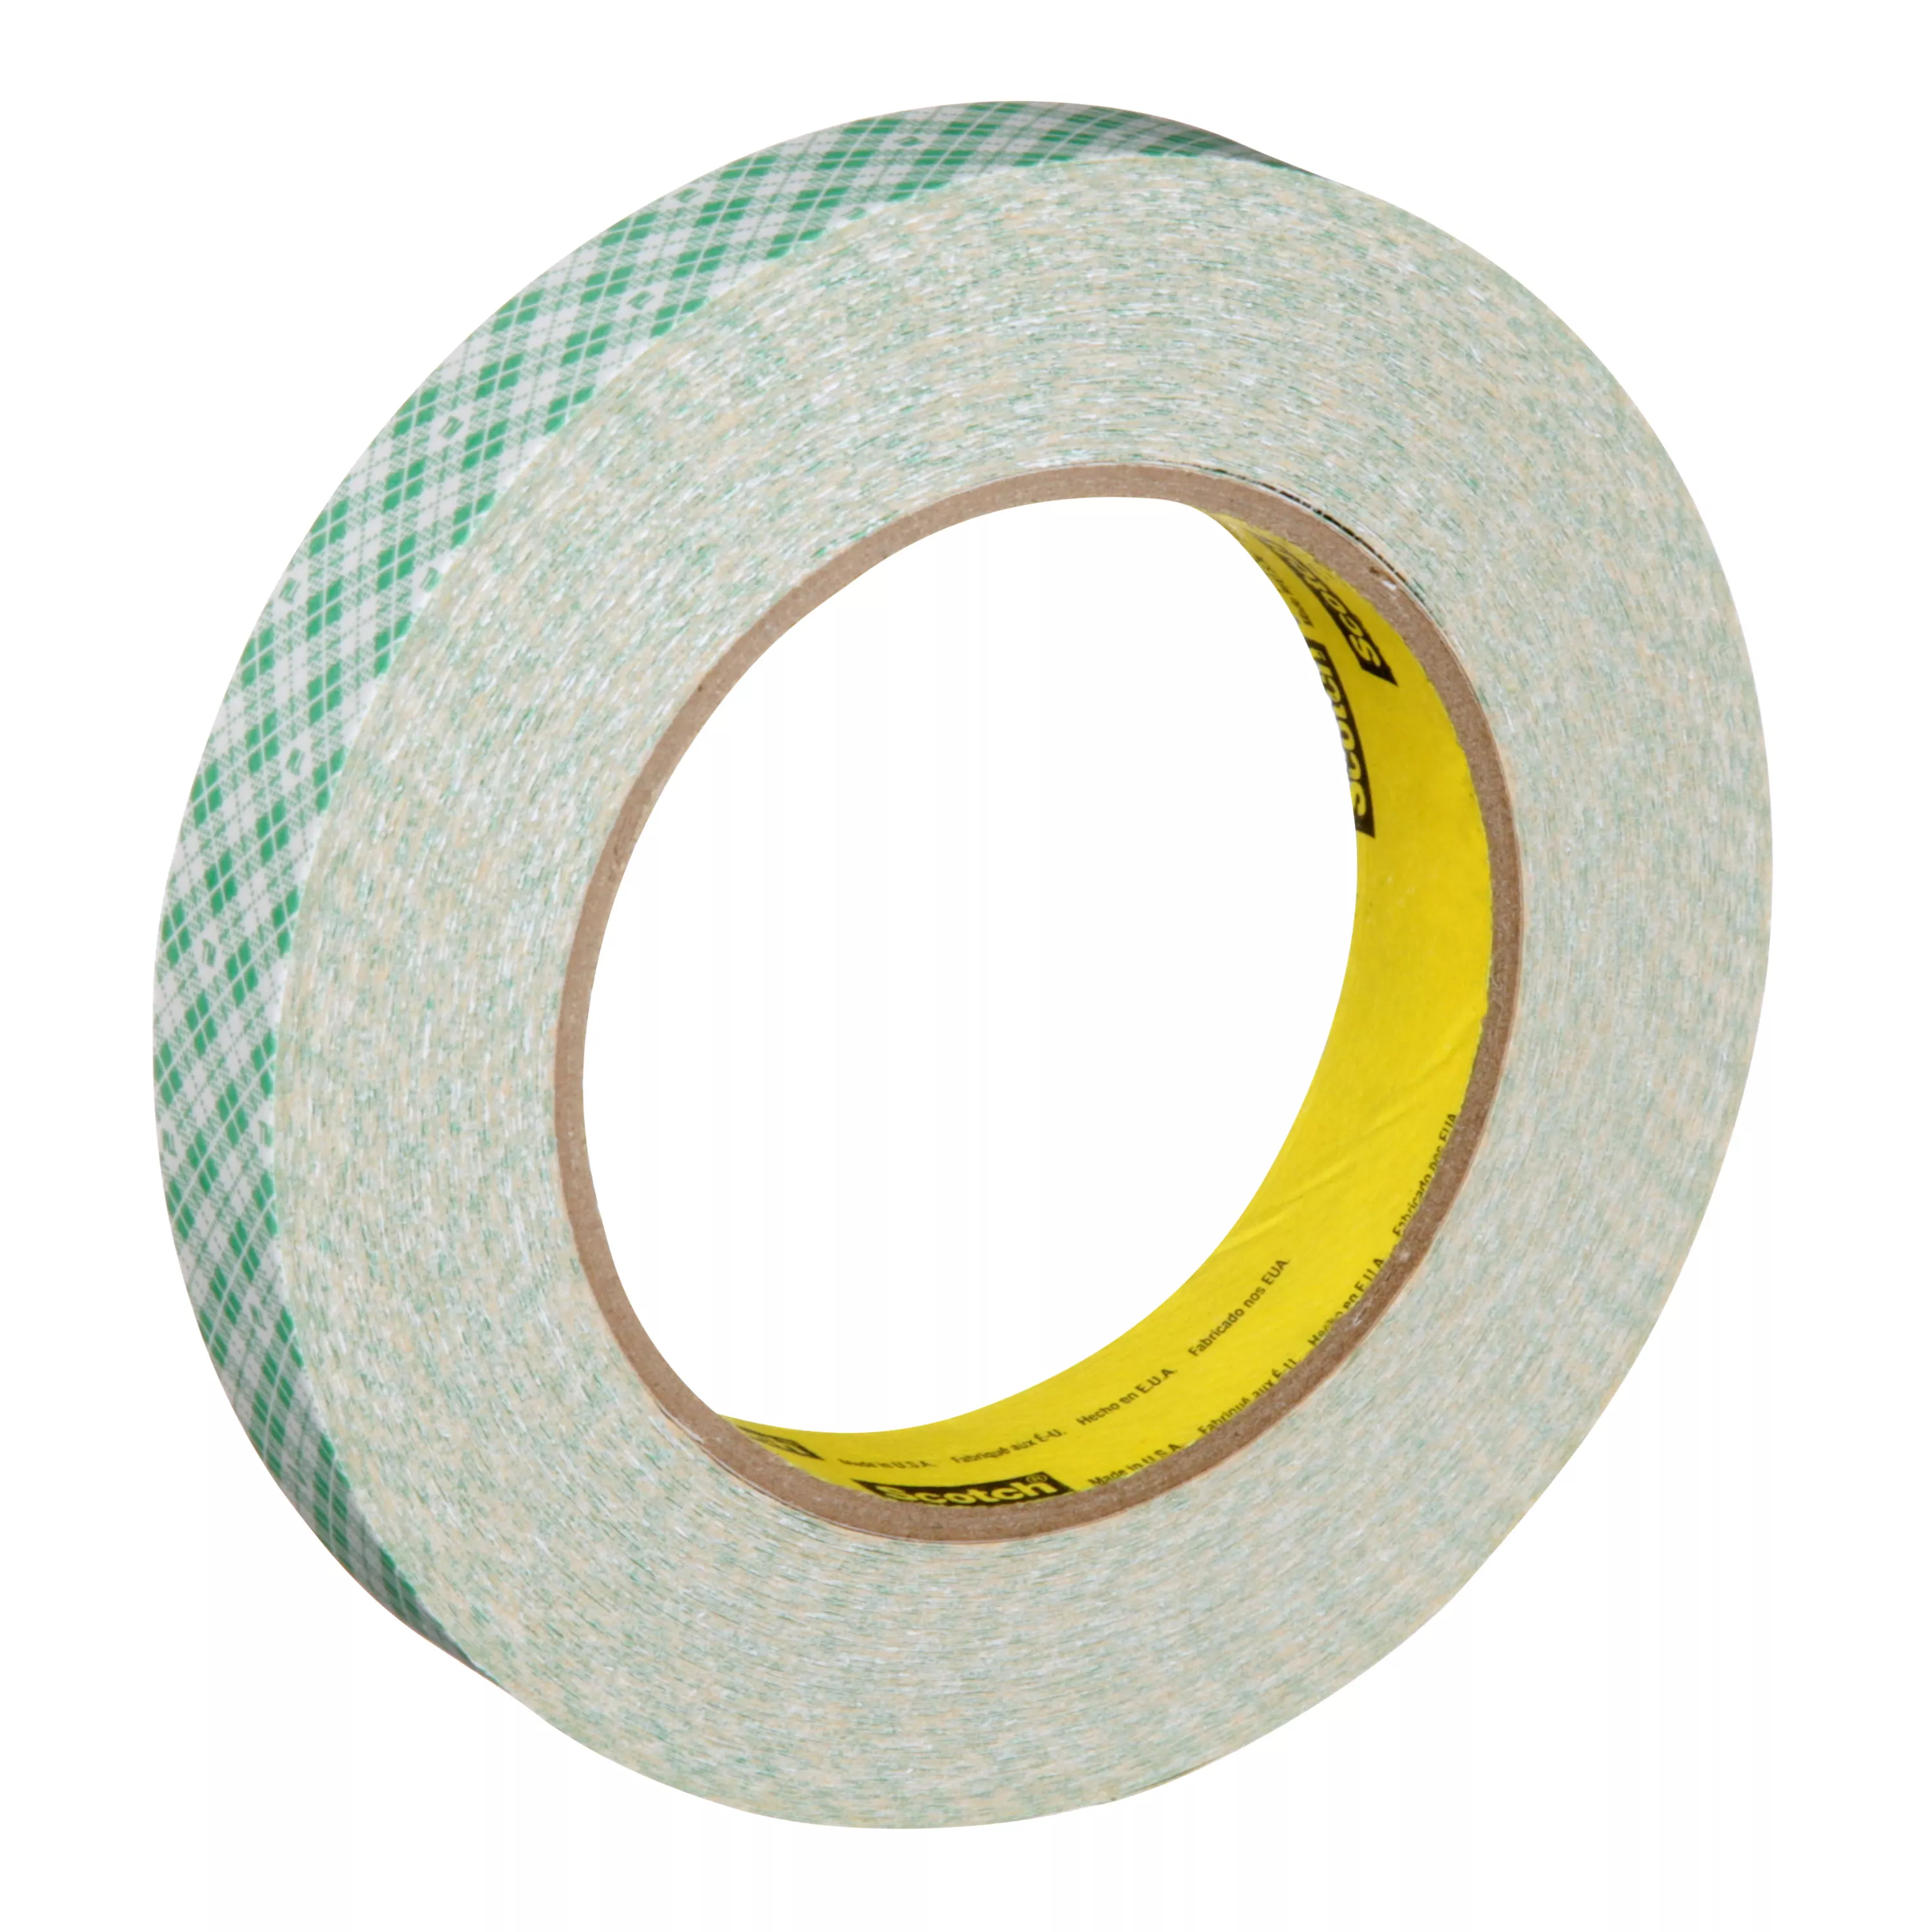 3M™ Double Coated Paper Tape 410M, Natural, 3/4 in x 36 yd, 5 mil, 48
rolls per case